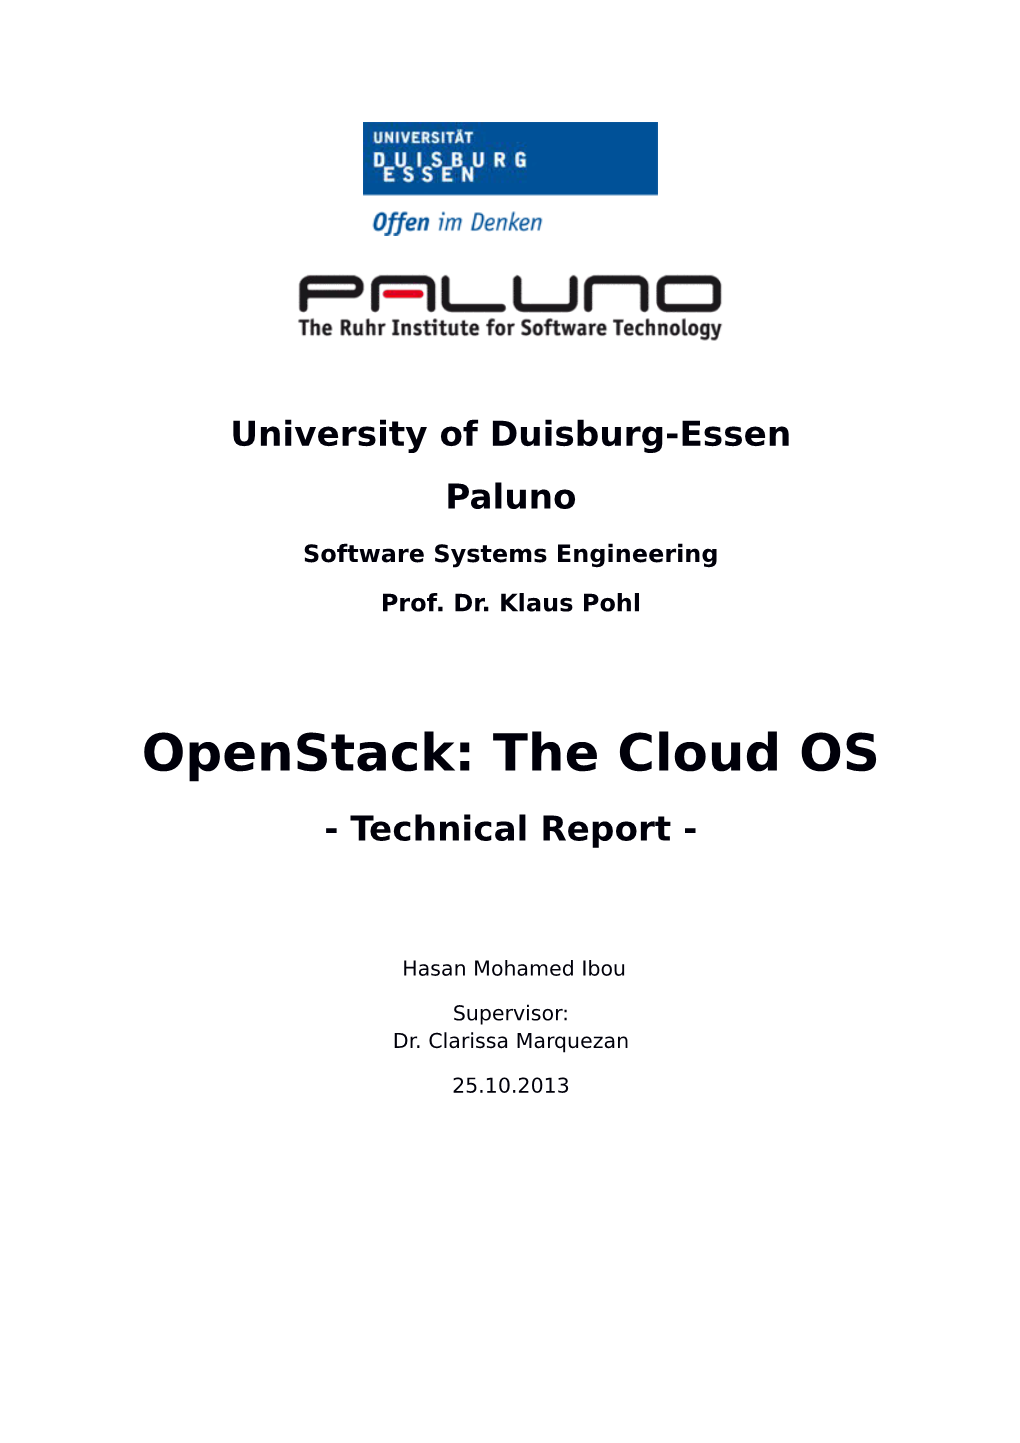 Openstack: the Cloud OS - Technical Report